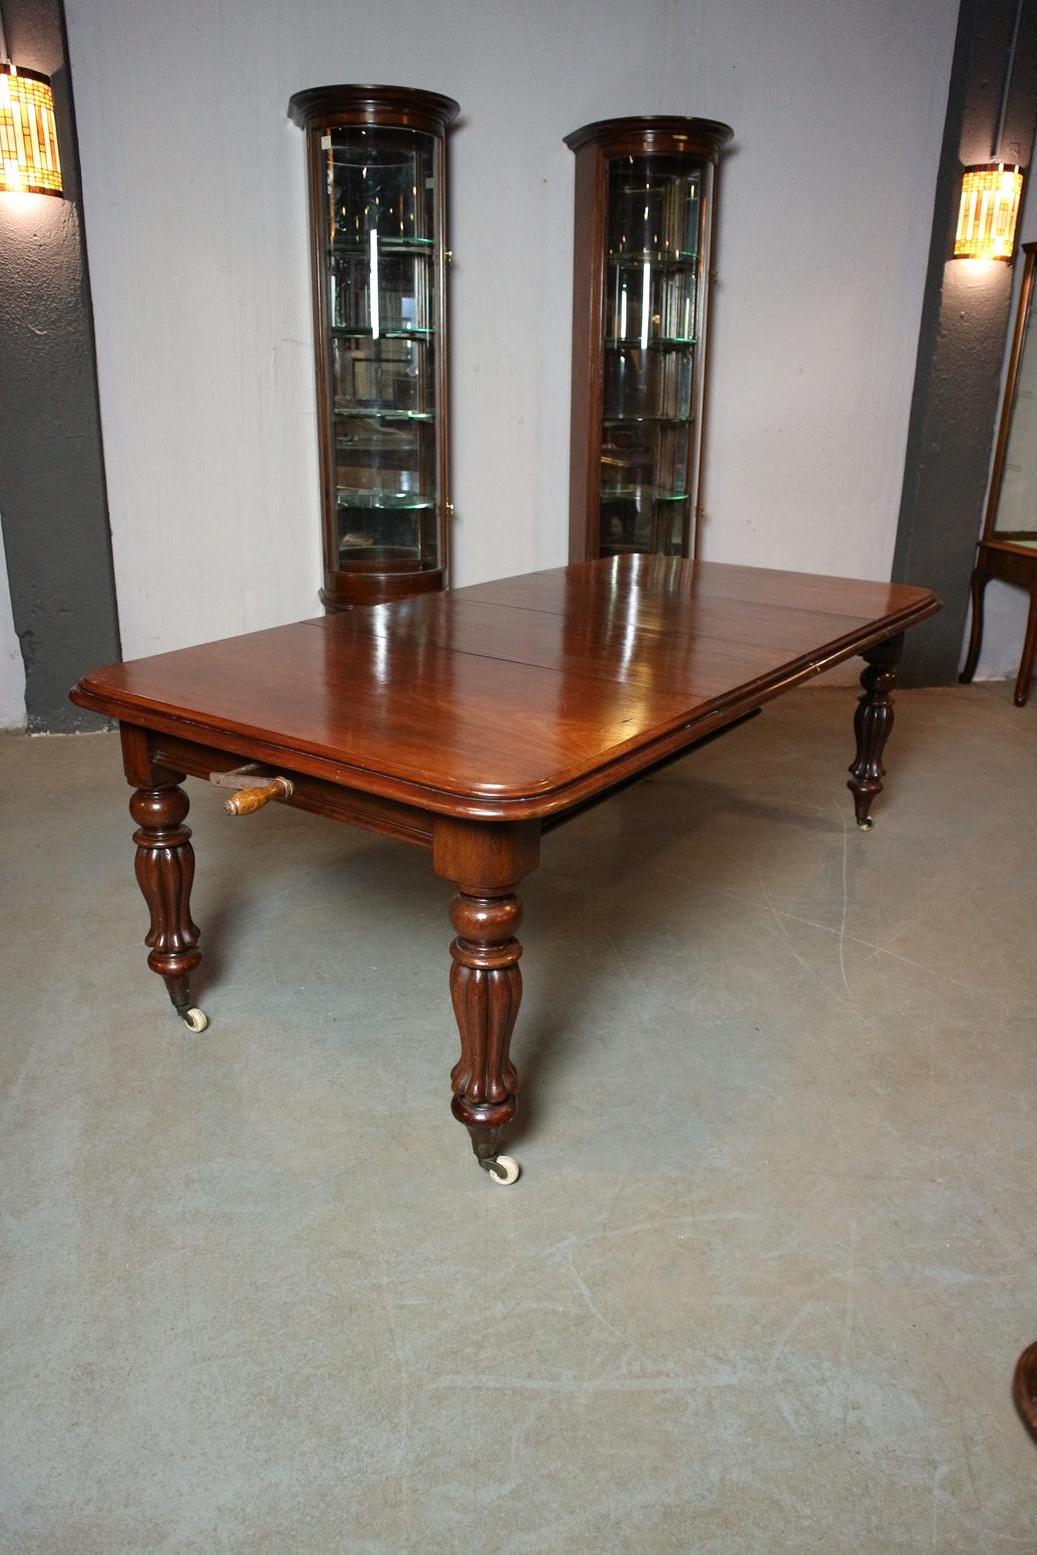 Victorian antique mahogany table with 2 extra original leaves. Beautiful quality mahogany with warm color. The table can be wind out to place the extra leaves. Table is in good condition, top has signs of wear.
Table can optionally be raised by